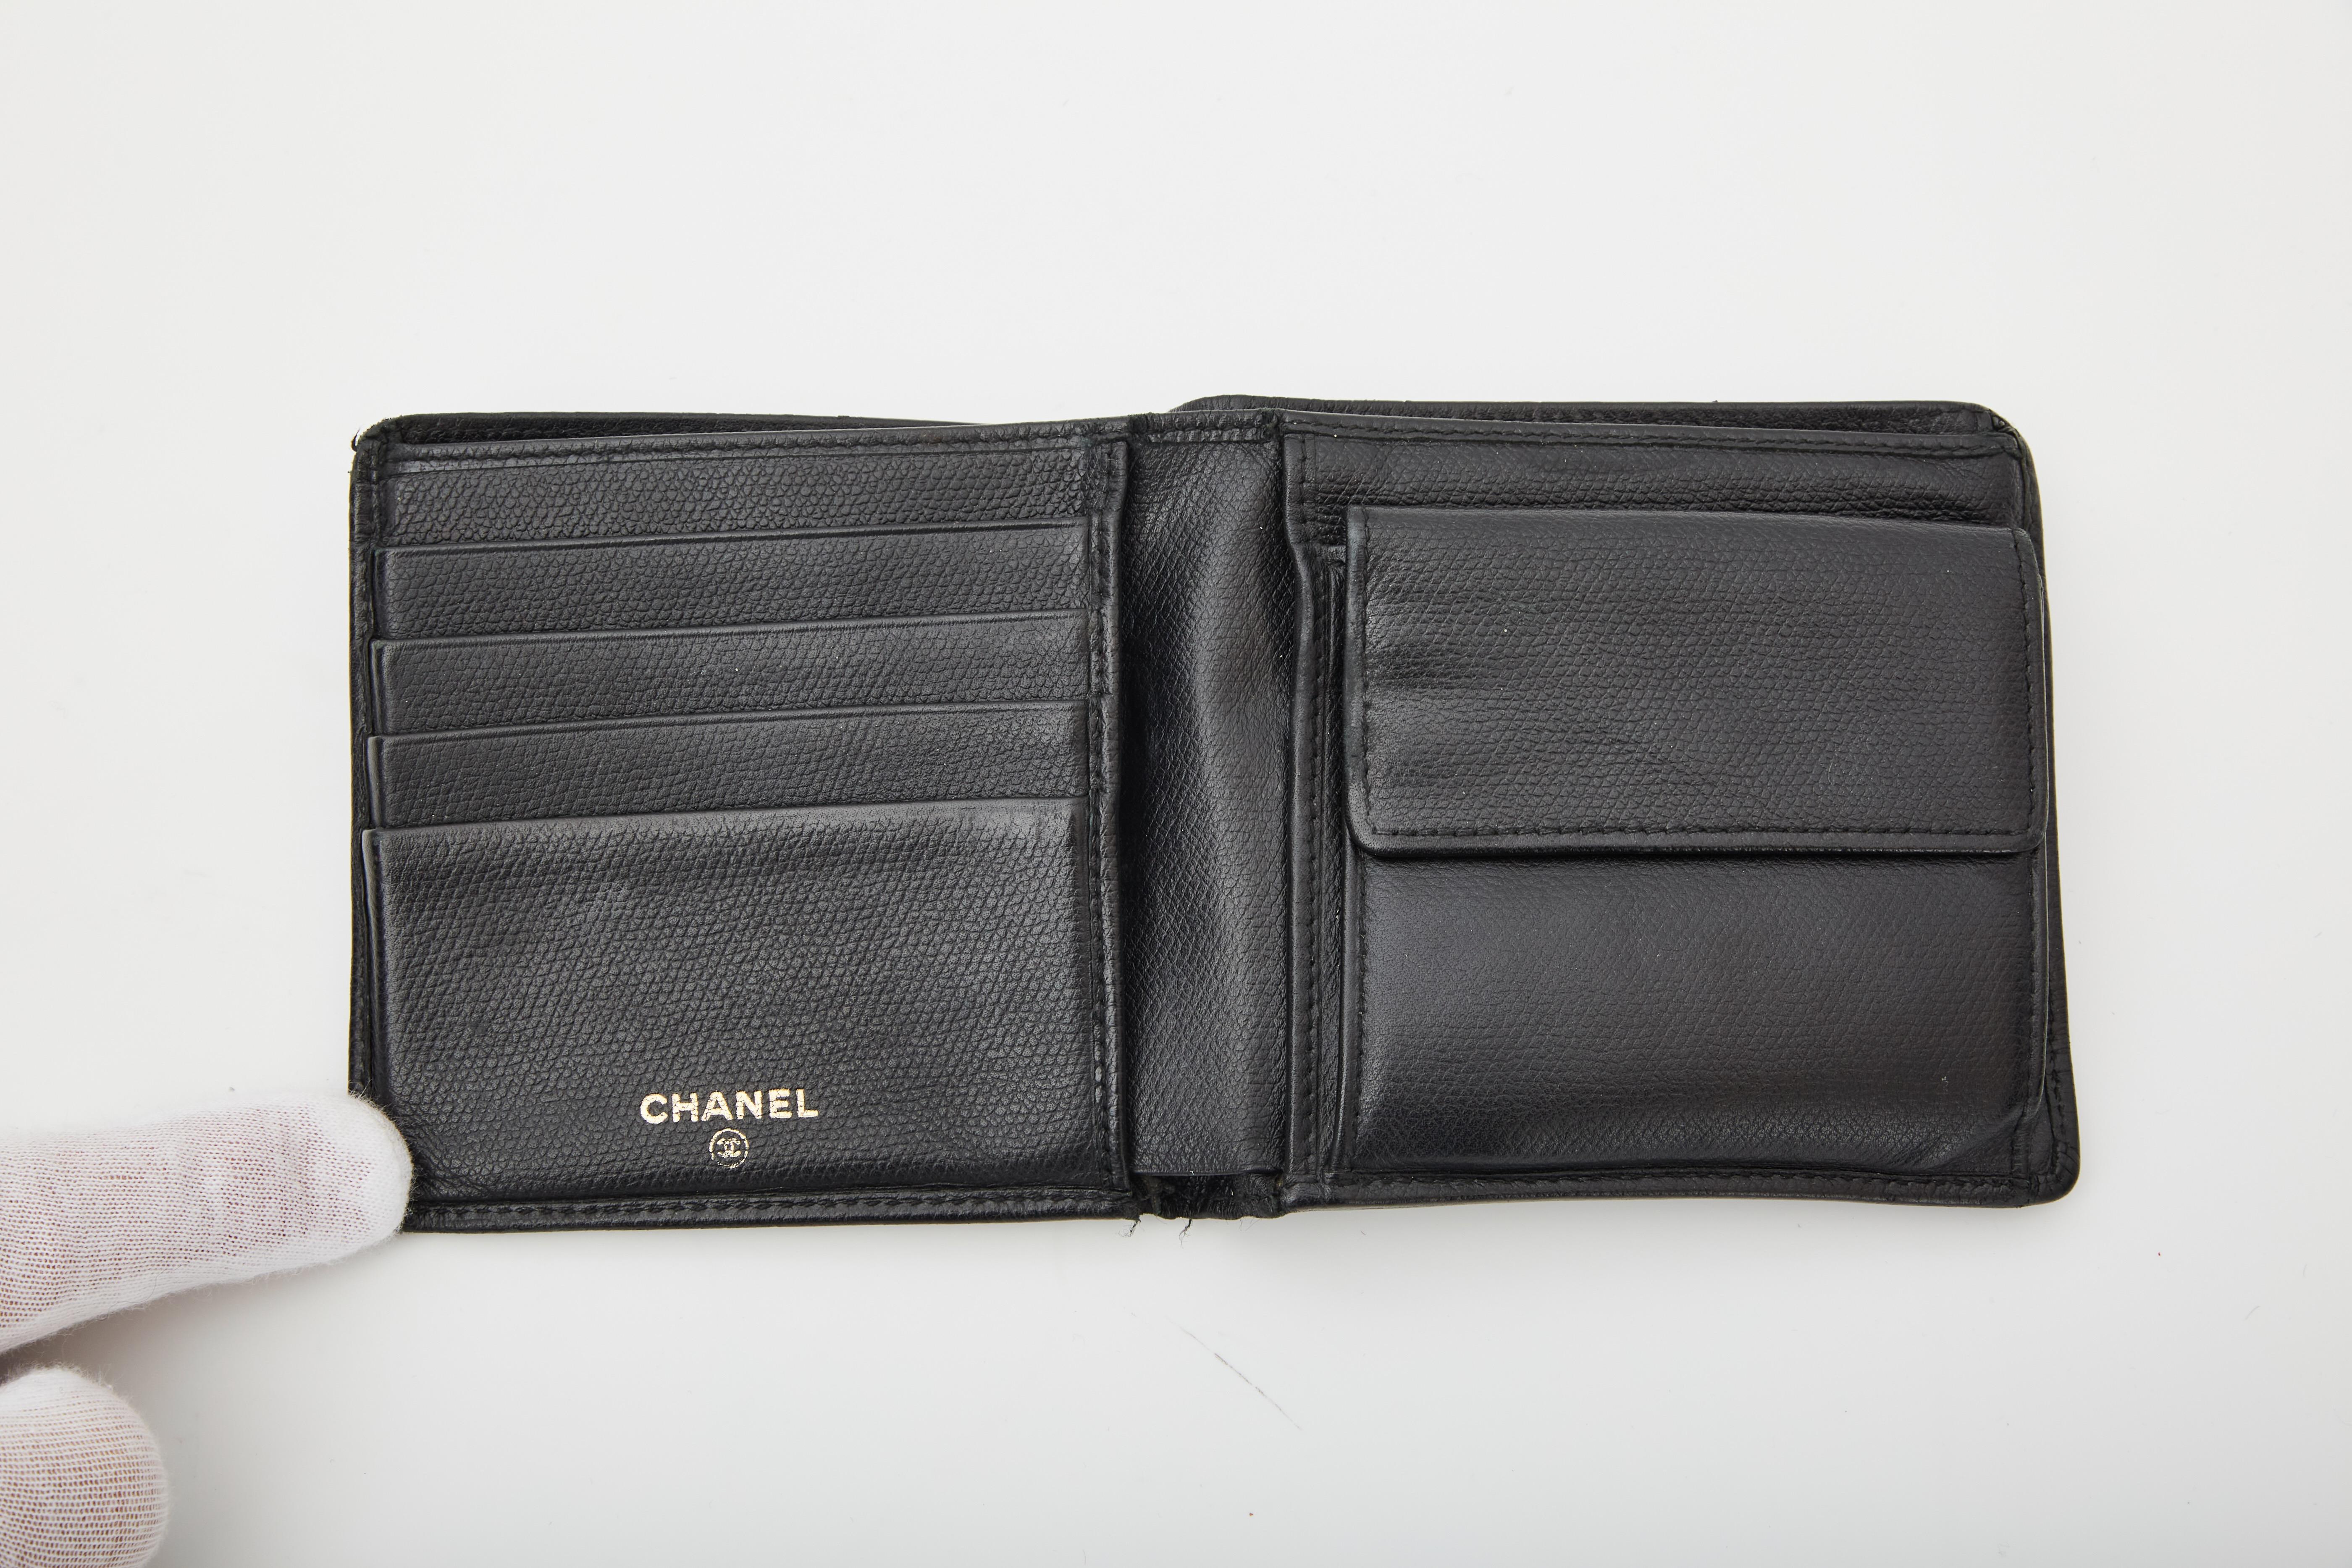 COLOR: Black 
MATERIAL: Caviar leather
MEASURES: H 4” x L 4”
COMES WITH: Box, protector sleeve and Authenticity card
CONDITION: Good - wallet appears lightly used with marks and used card slots. The code has rubbed off.

Made in France